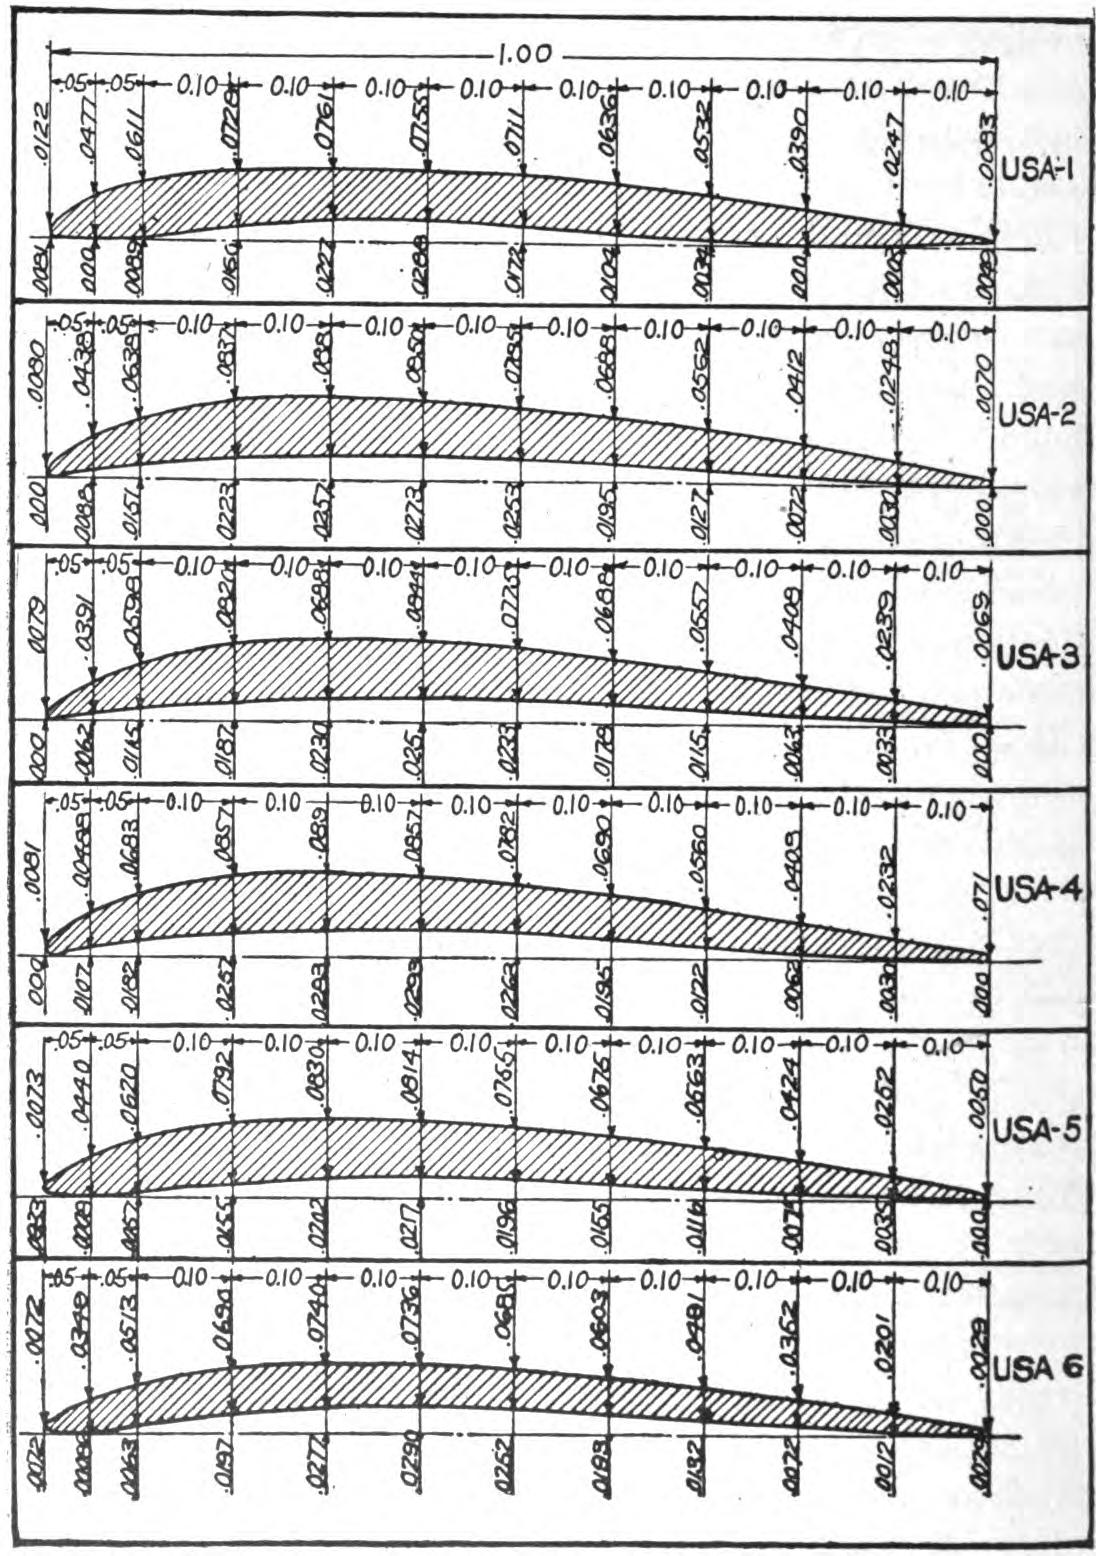 Fig. 14. U.S.A. Wing Sections Nos. 1-2-3-4-5-6